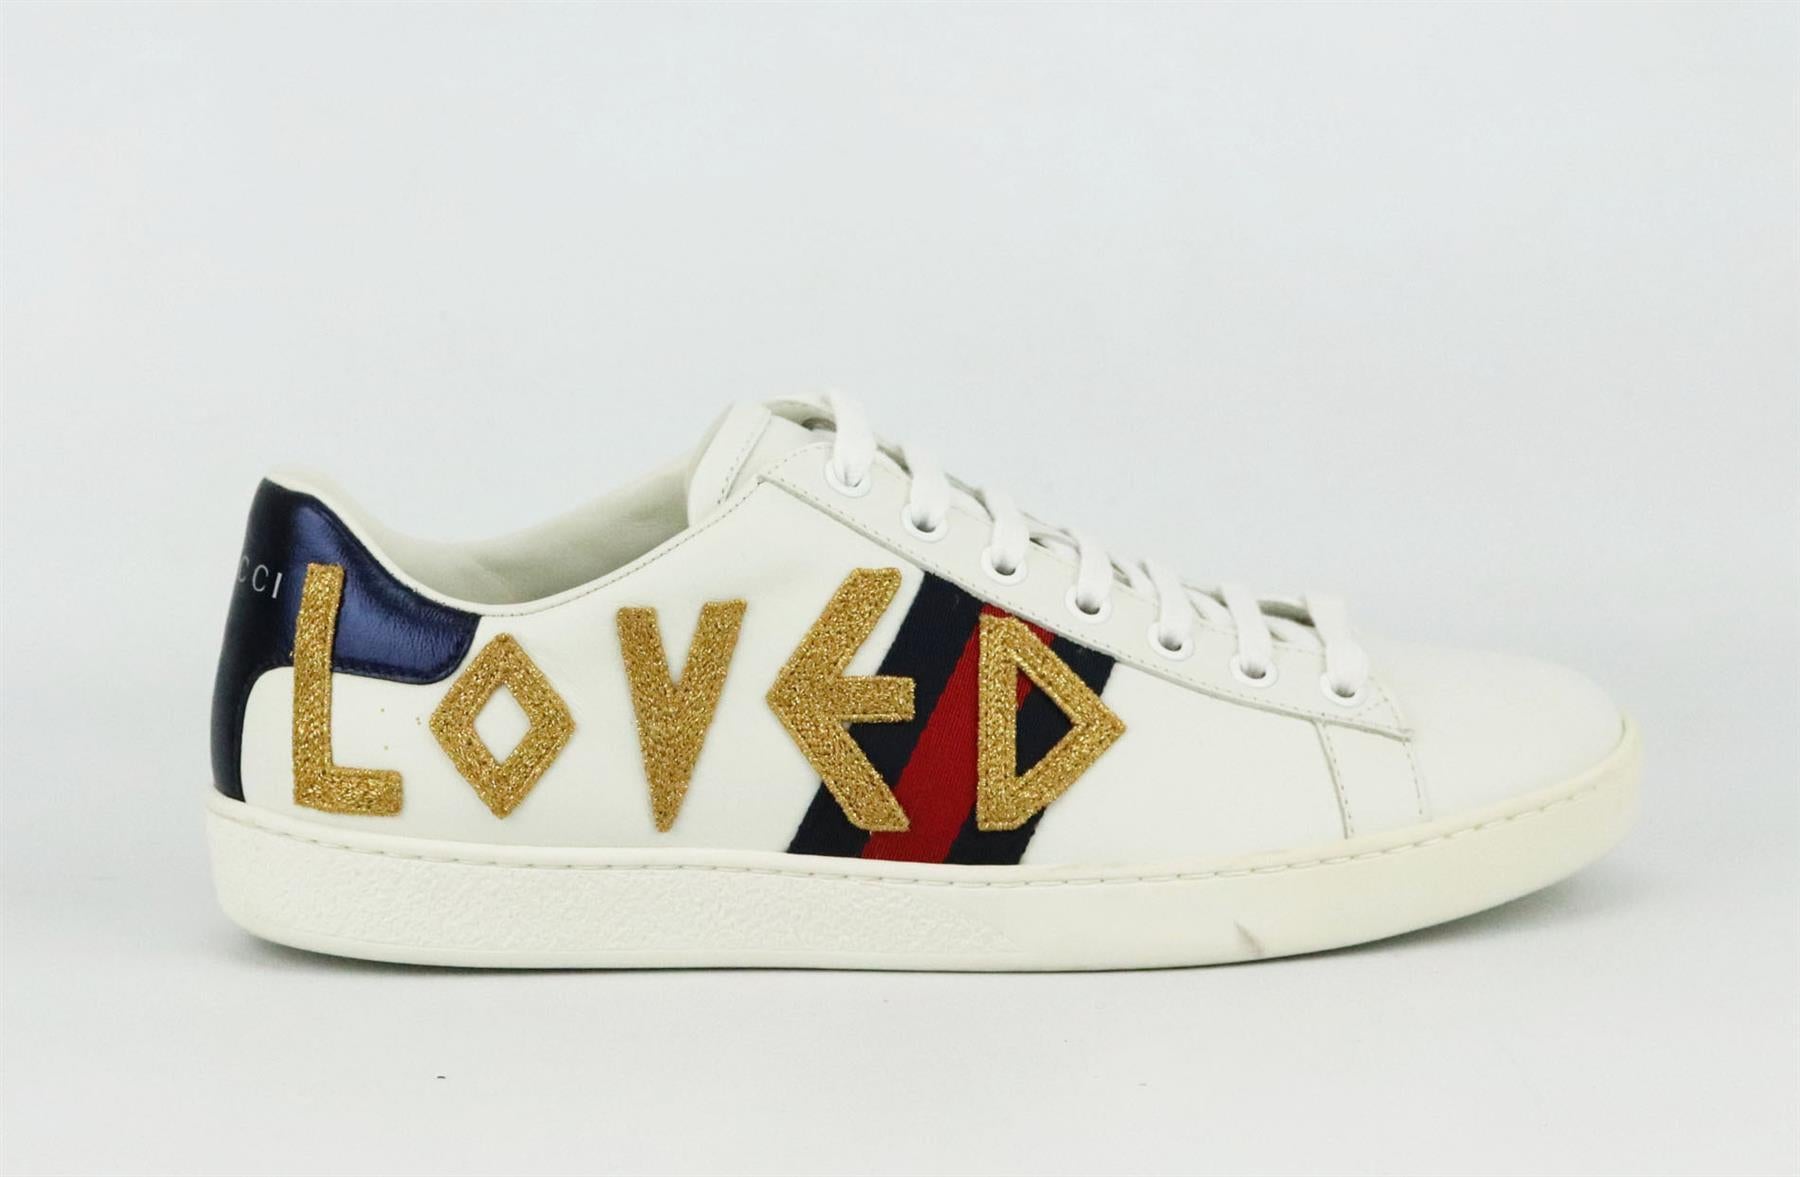 These 'Ace' sneakers by Gucci are a cool, sporty take on the now iconic style, made in Italy from pristine white leather, they have the instantly recognizable navy and red webbing that's embroidered with a LOVED in gold down the sides. 
Rubber sole